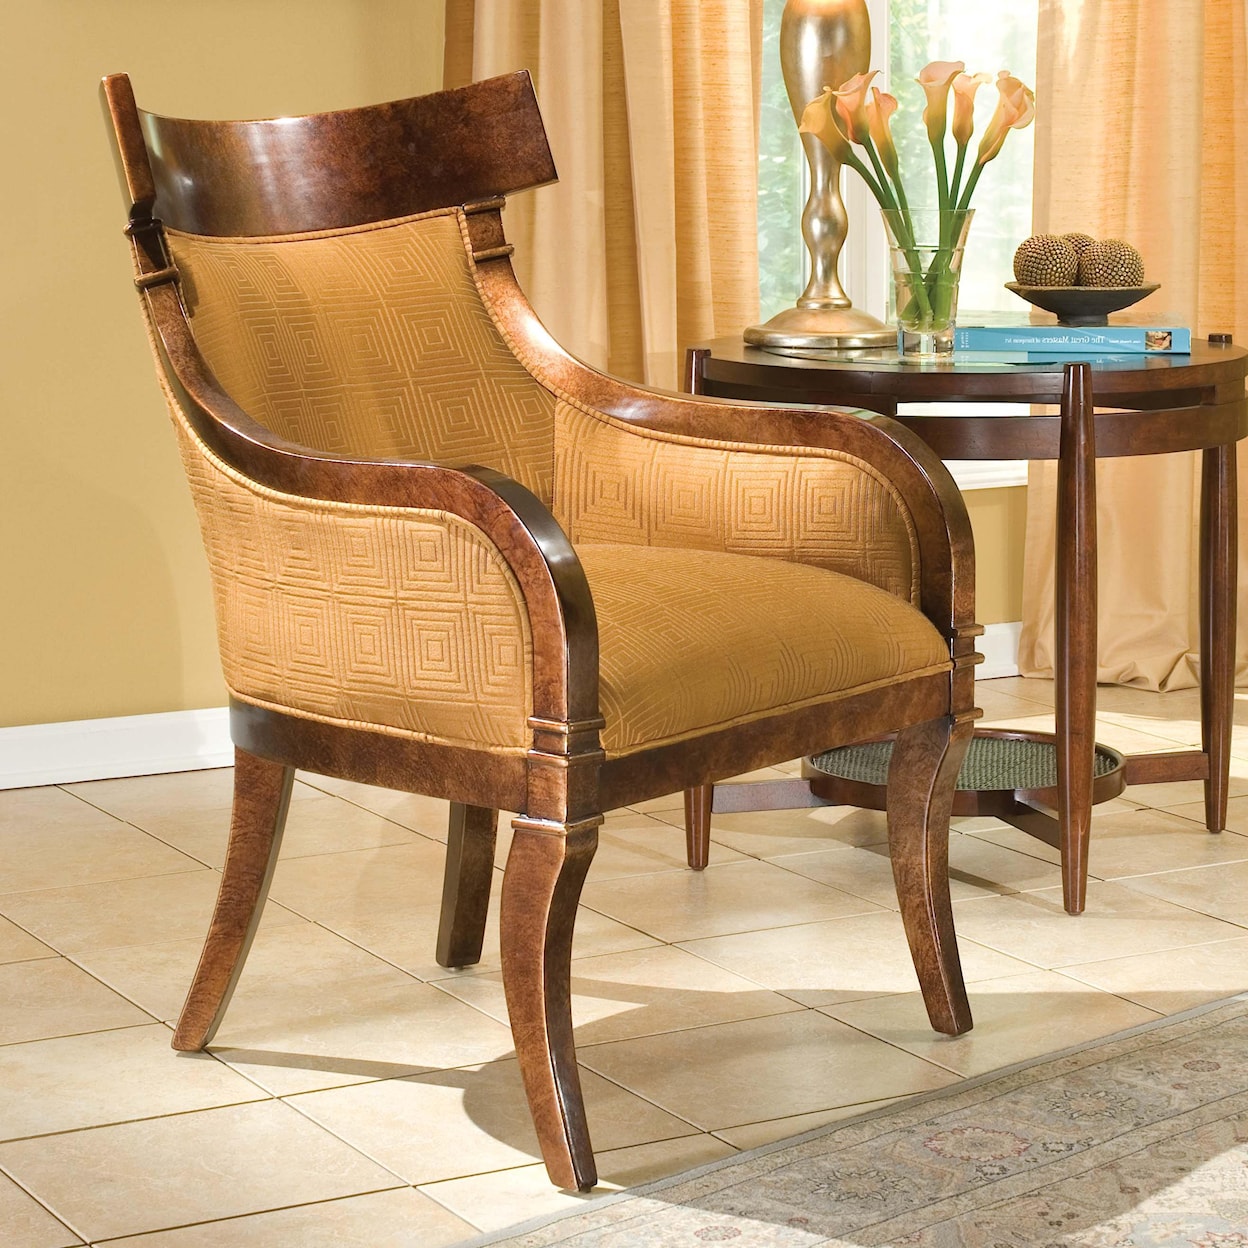 Fairfield Chairs Rustic Accent Chair